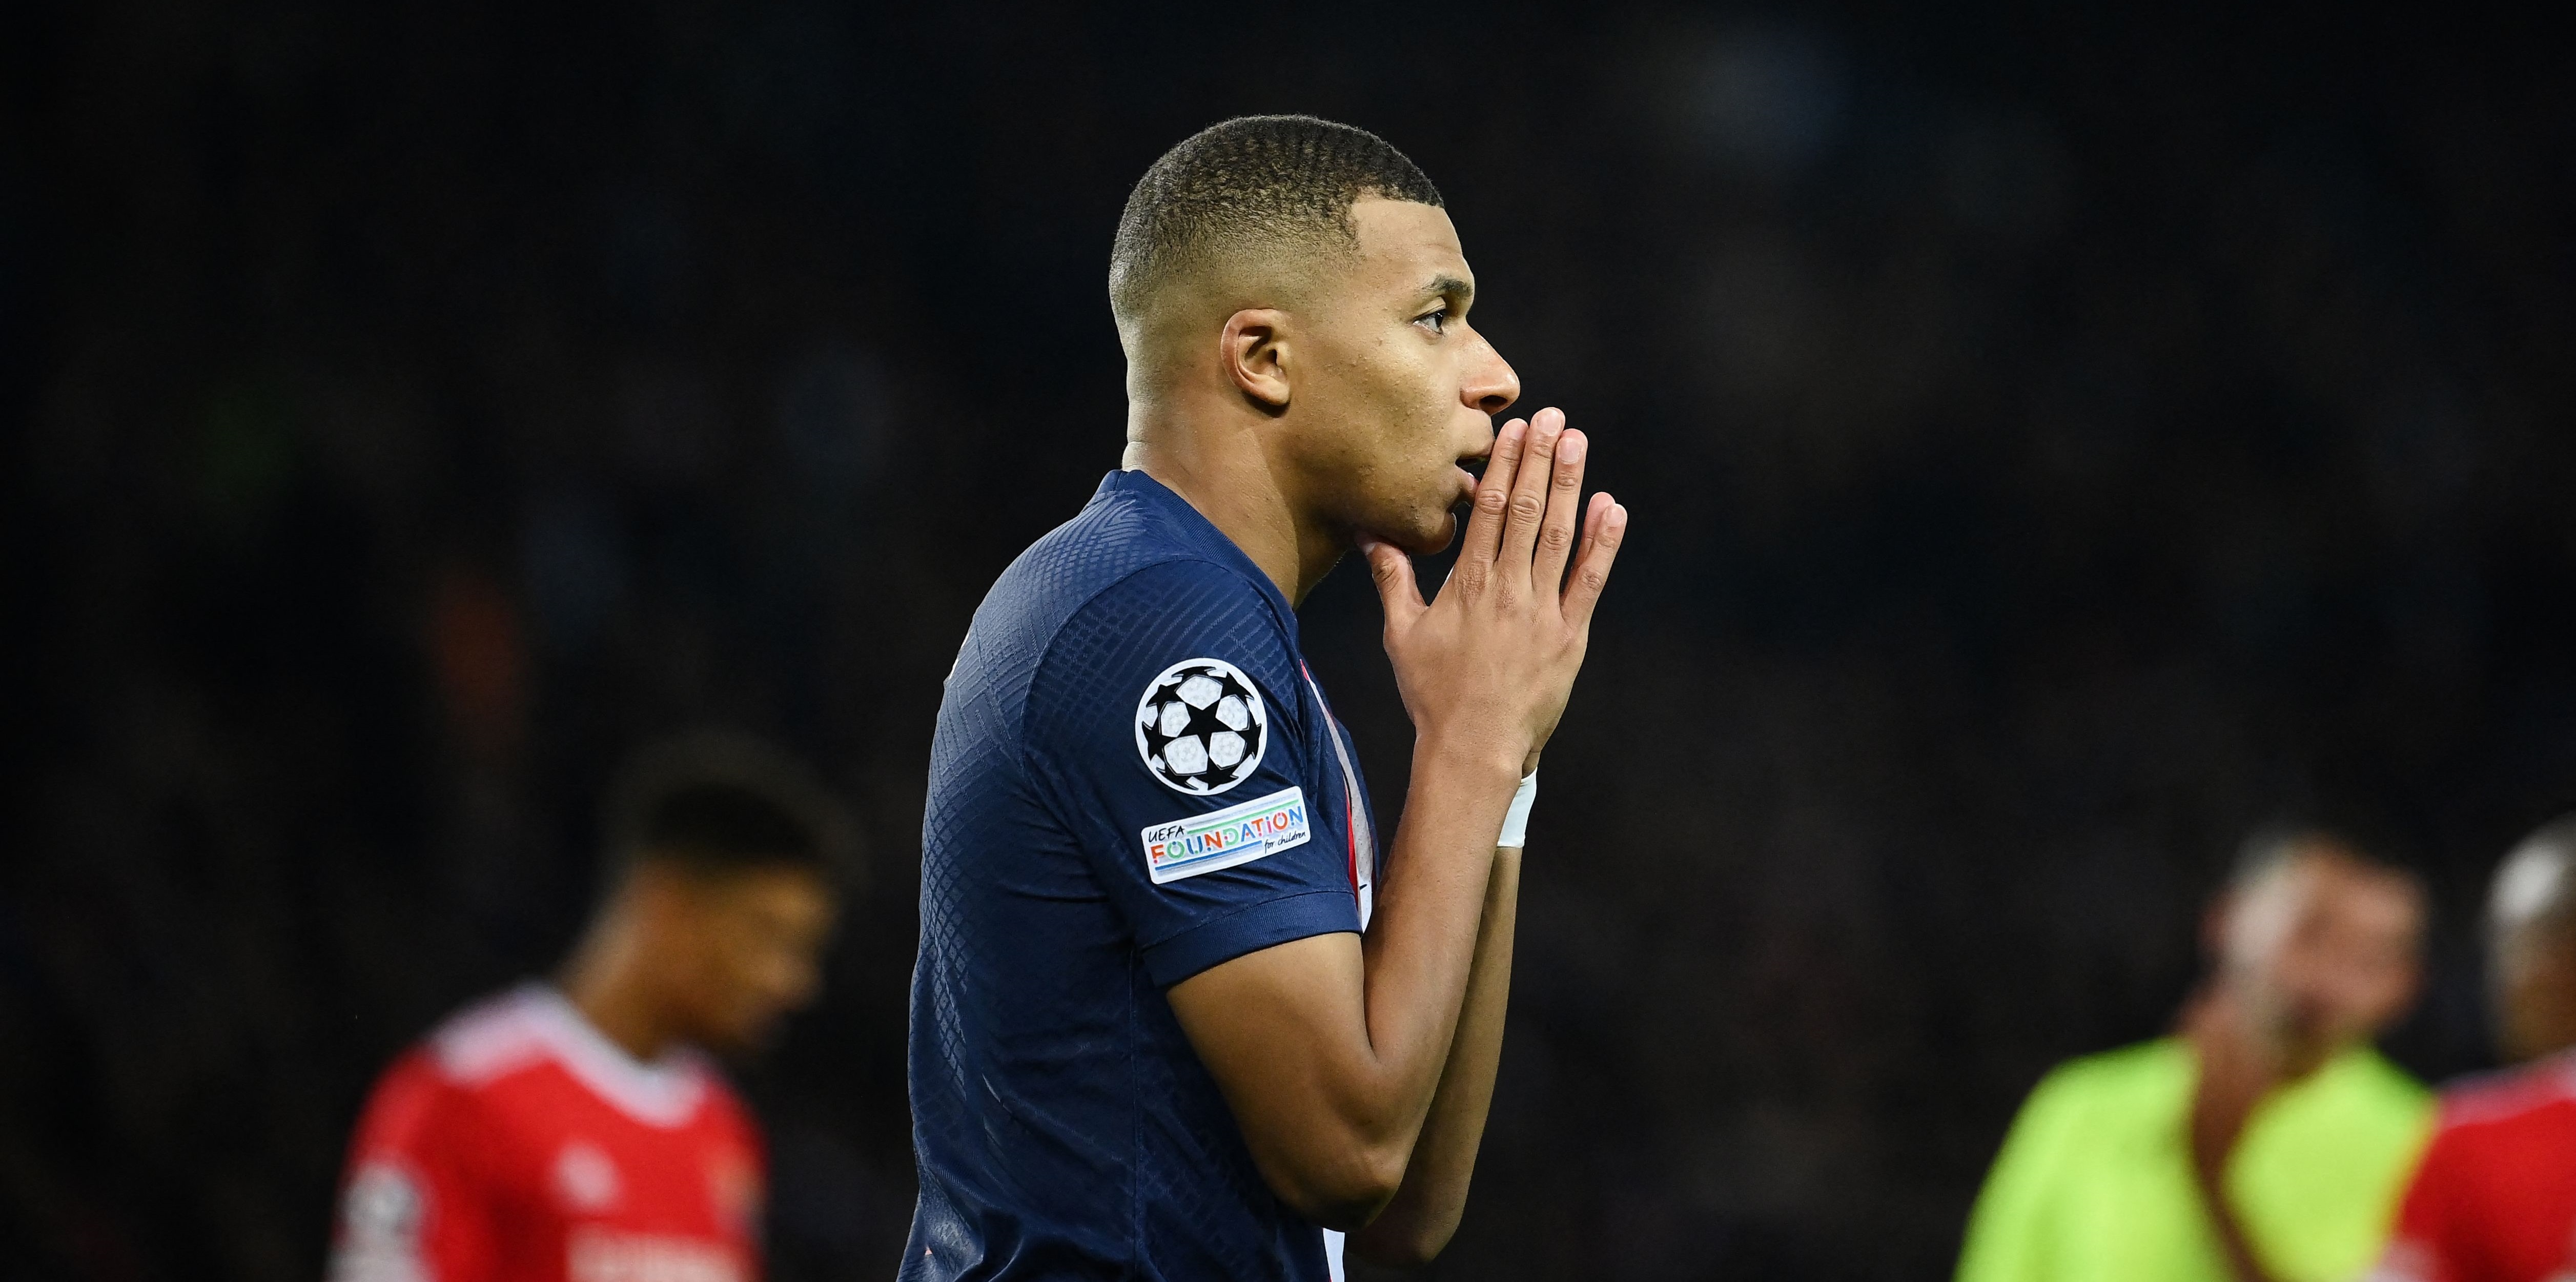 Mbappe’s mother has already provided huge hint at next move amid PSG exit talk